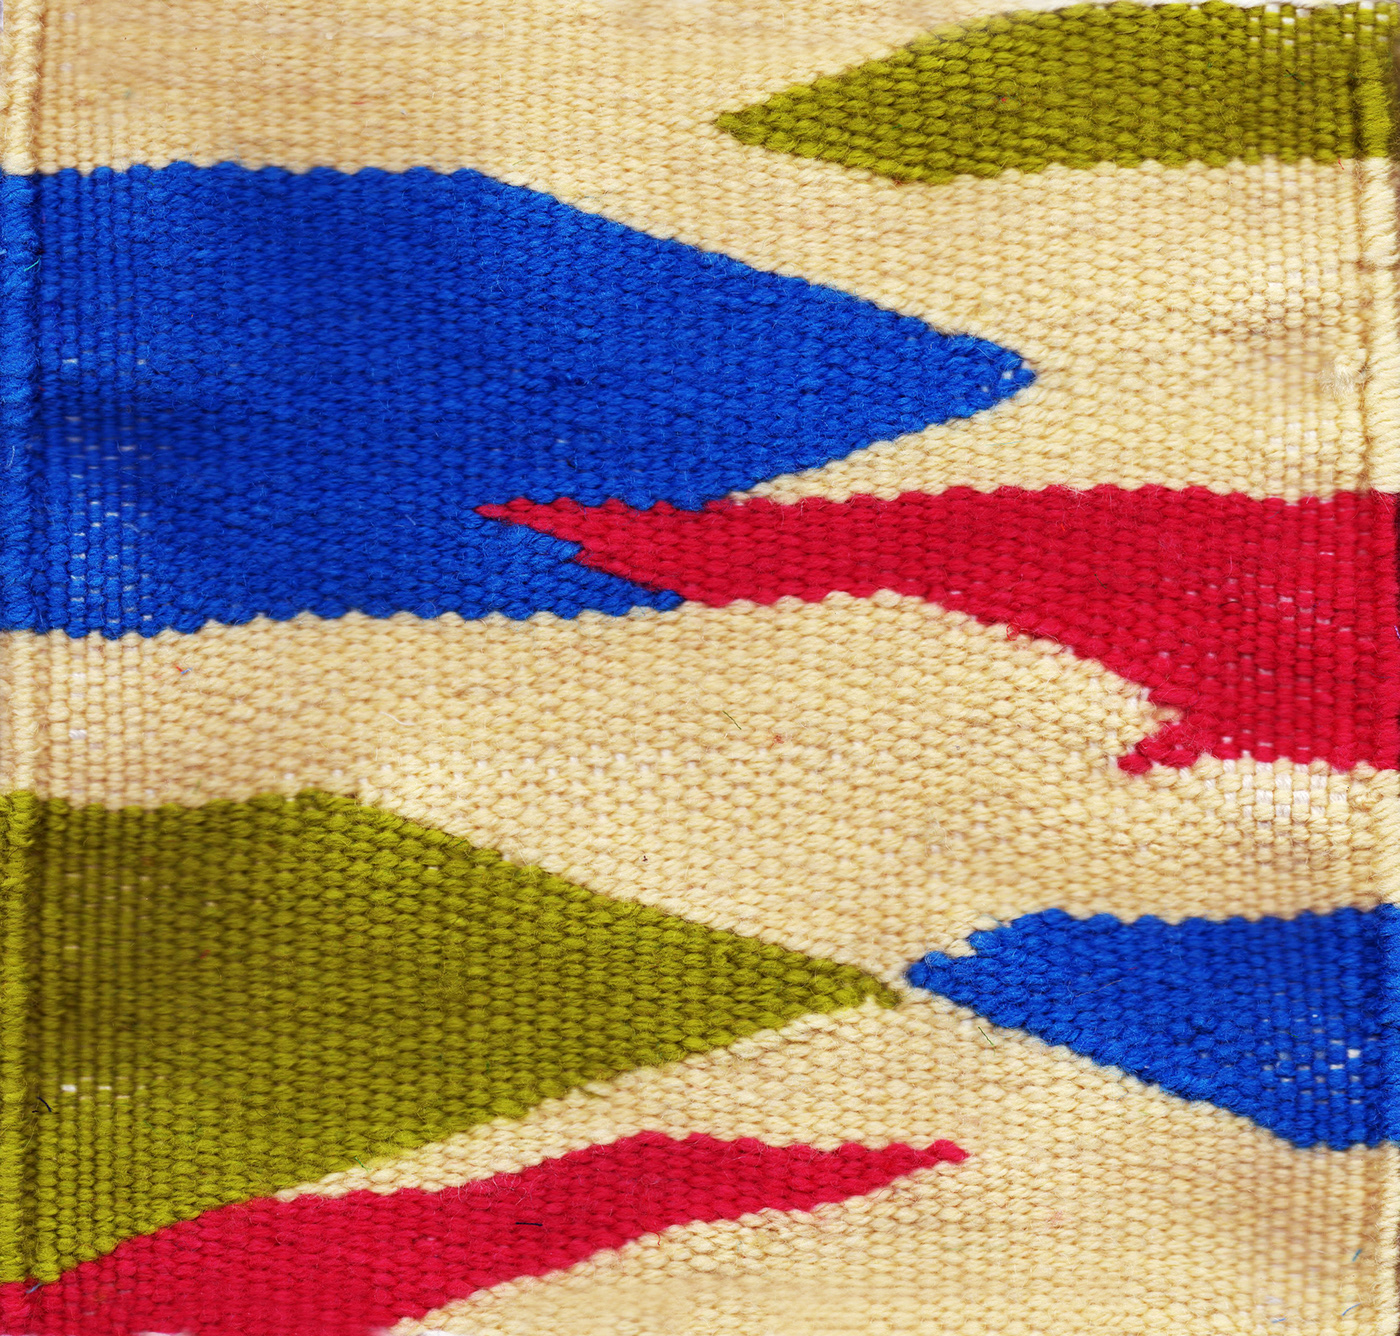 hand-woven Hand-loom weaving colour and weave playful draft fabric construction woven surfaces